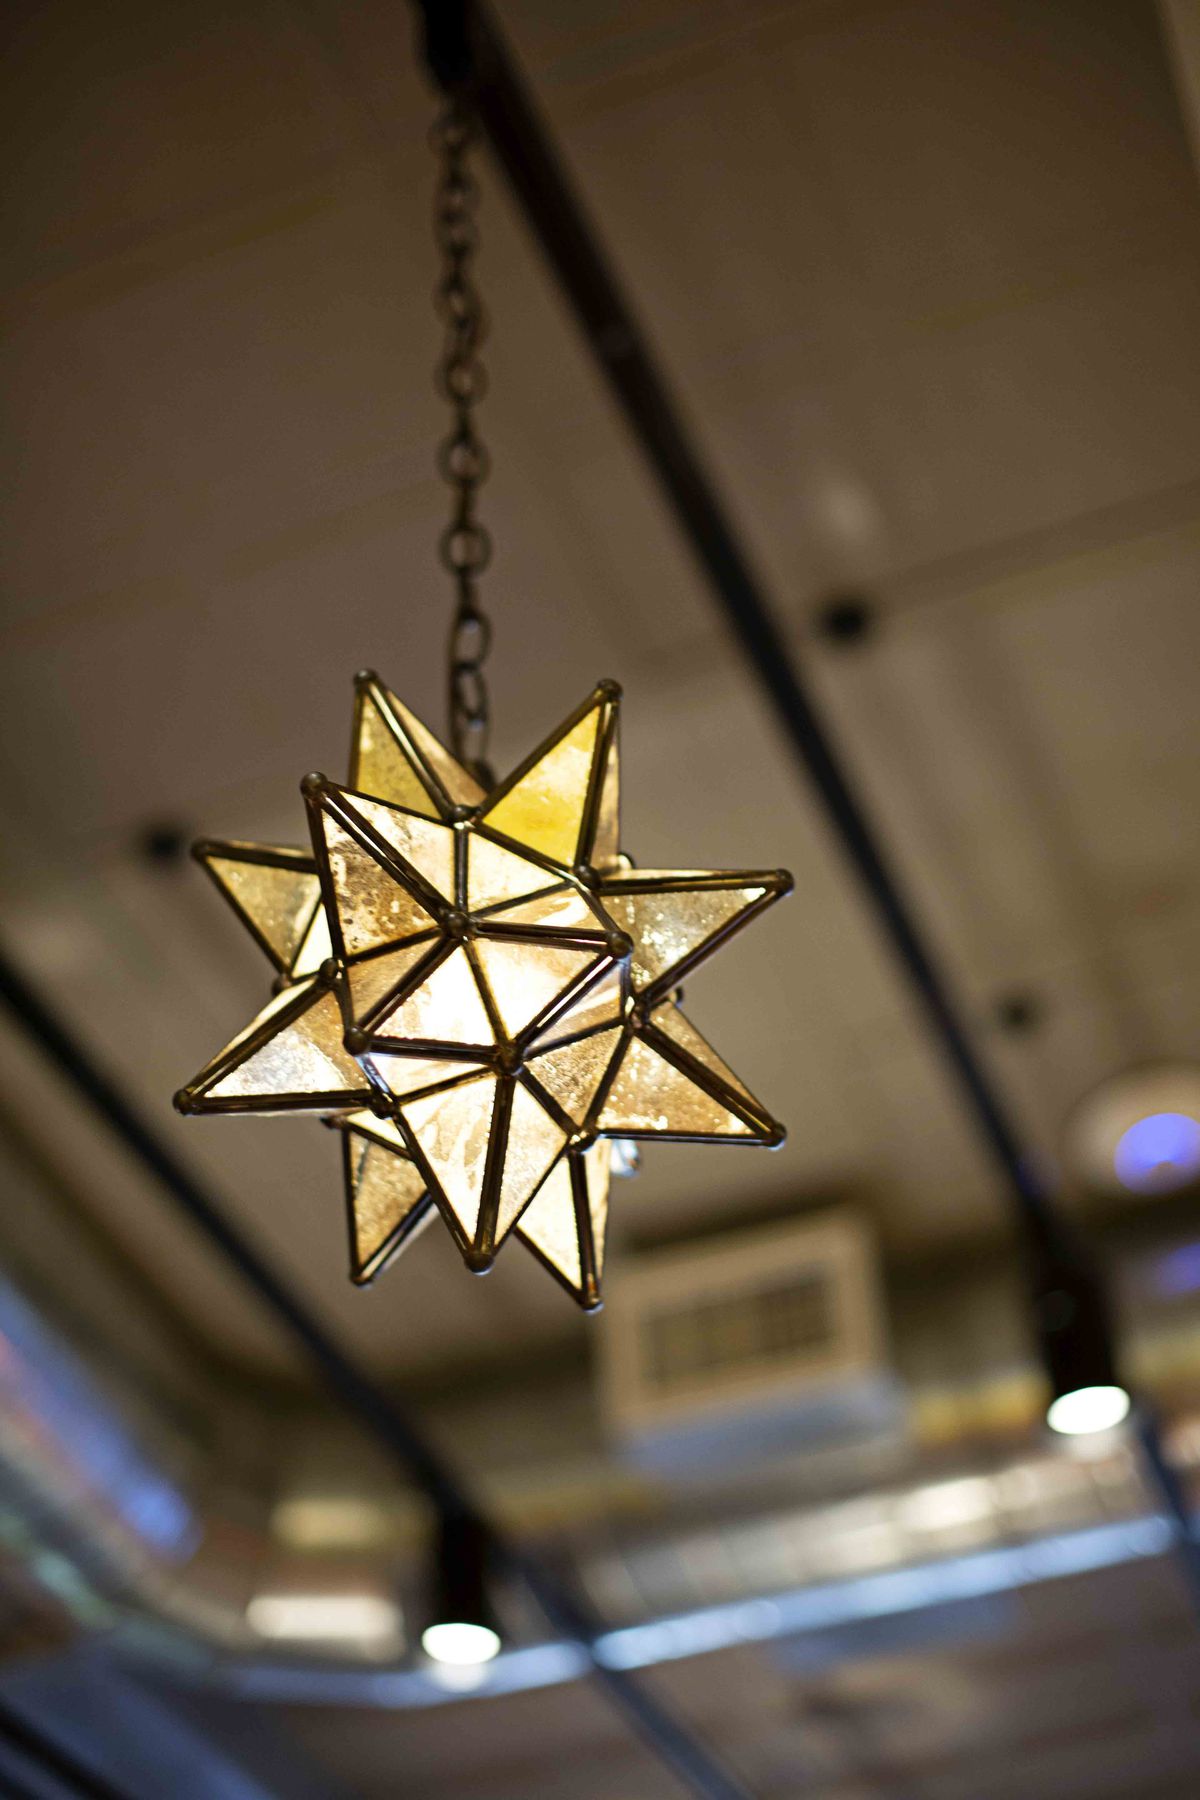 A glass light fixture that is star-shaped hangs from a ceiling